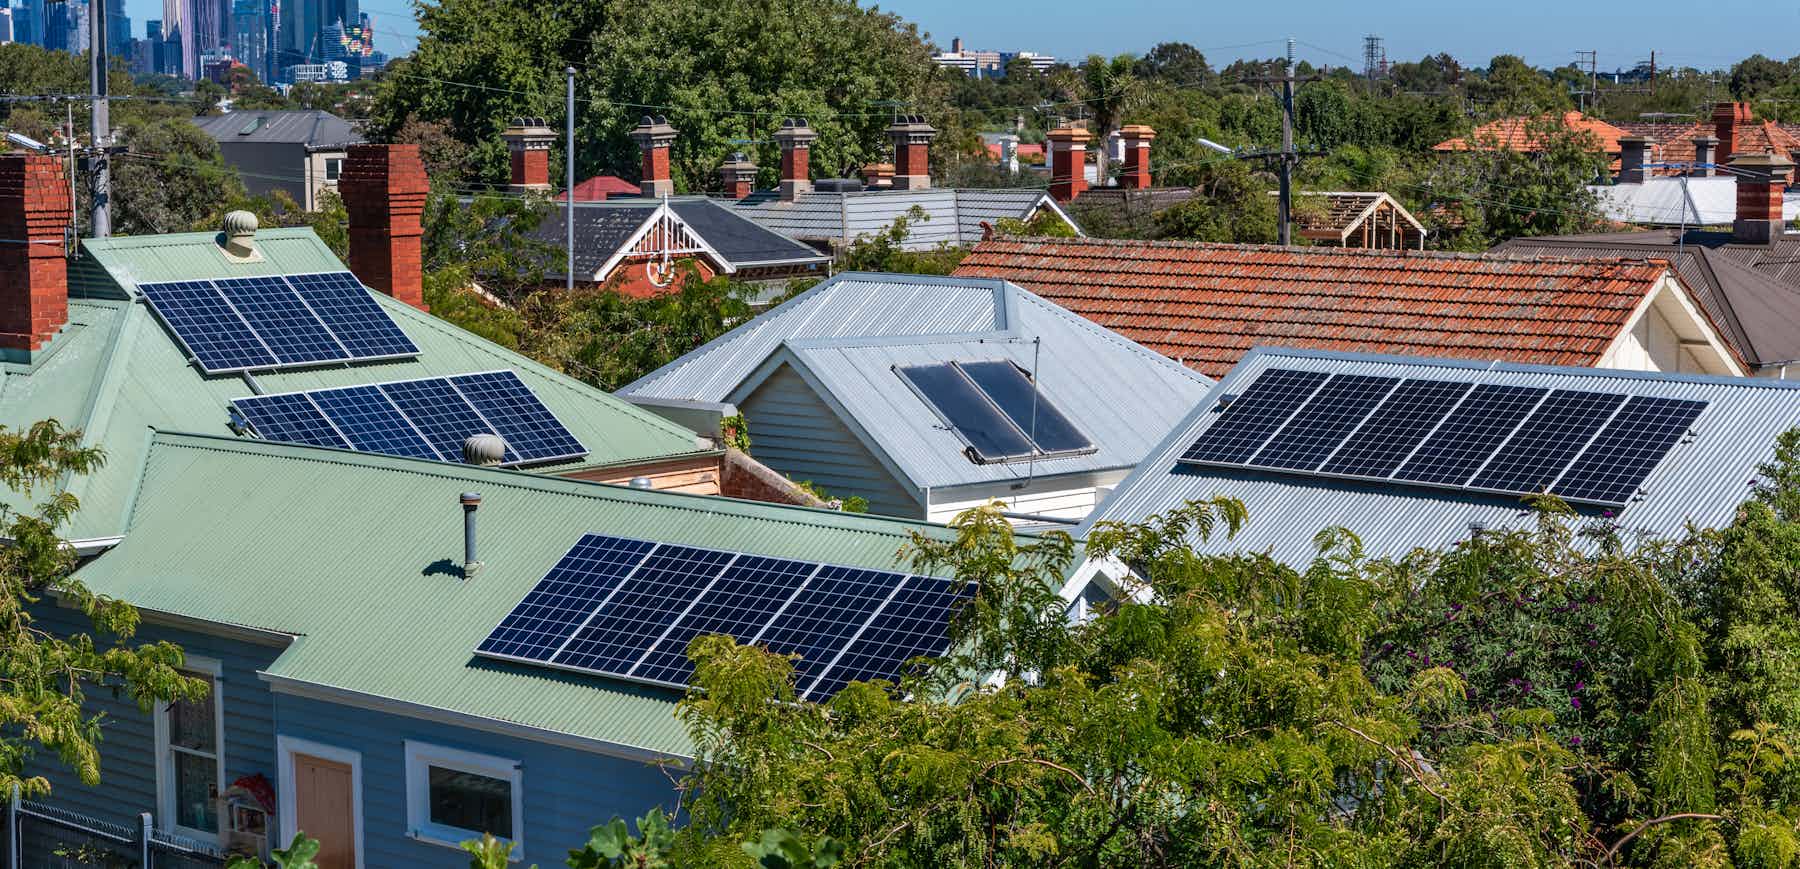 Check your mirrors three things rooftop solar can teach us about